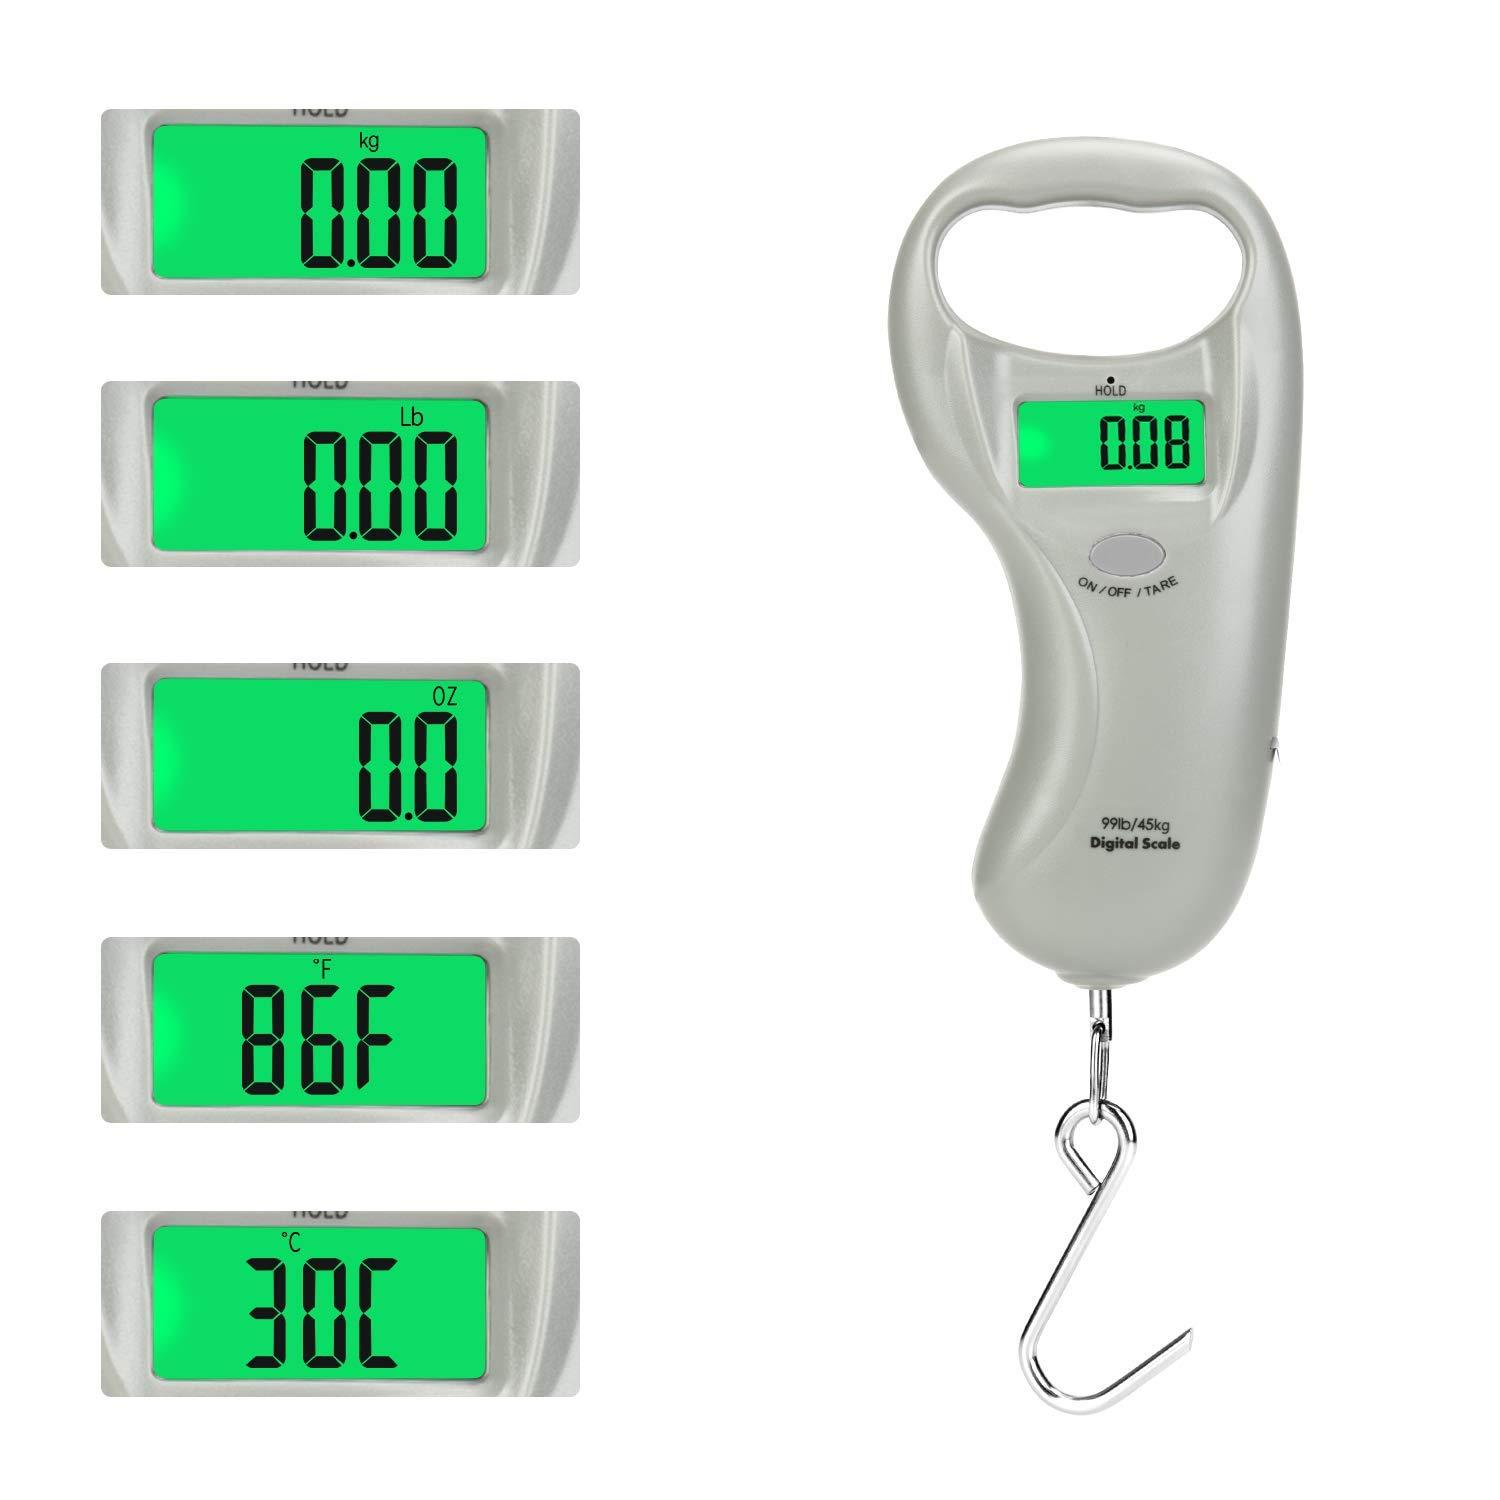 Digital Fish Scale Hanging Scale with Tape Measure,Temperature